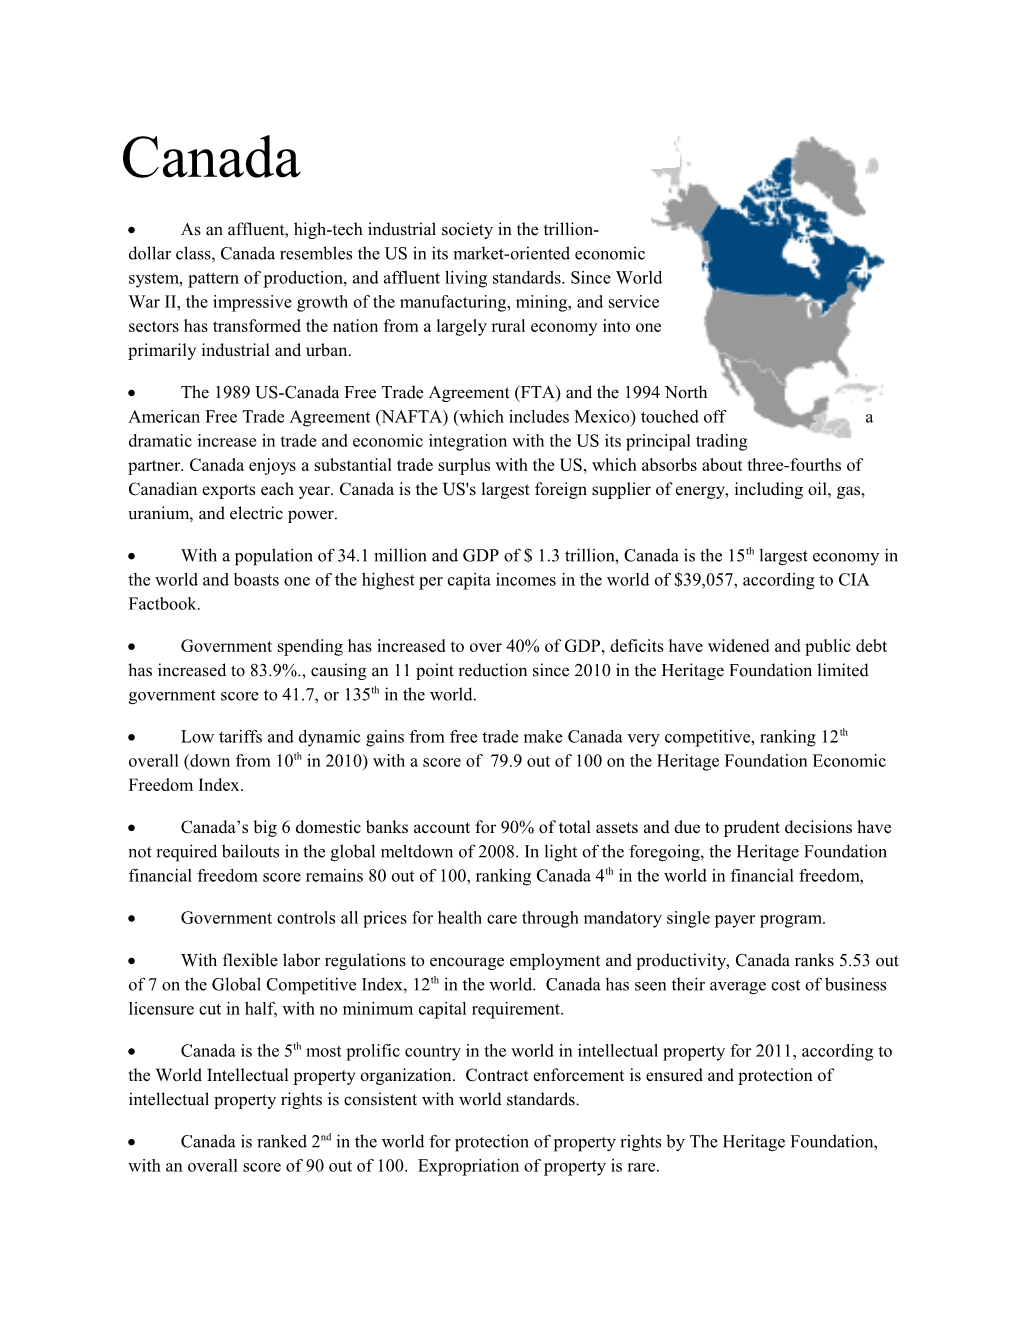 The 1989 US-Canada Free Trade Agreement (FTA) and the 1994 North American Free Trade Agreement